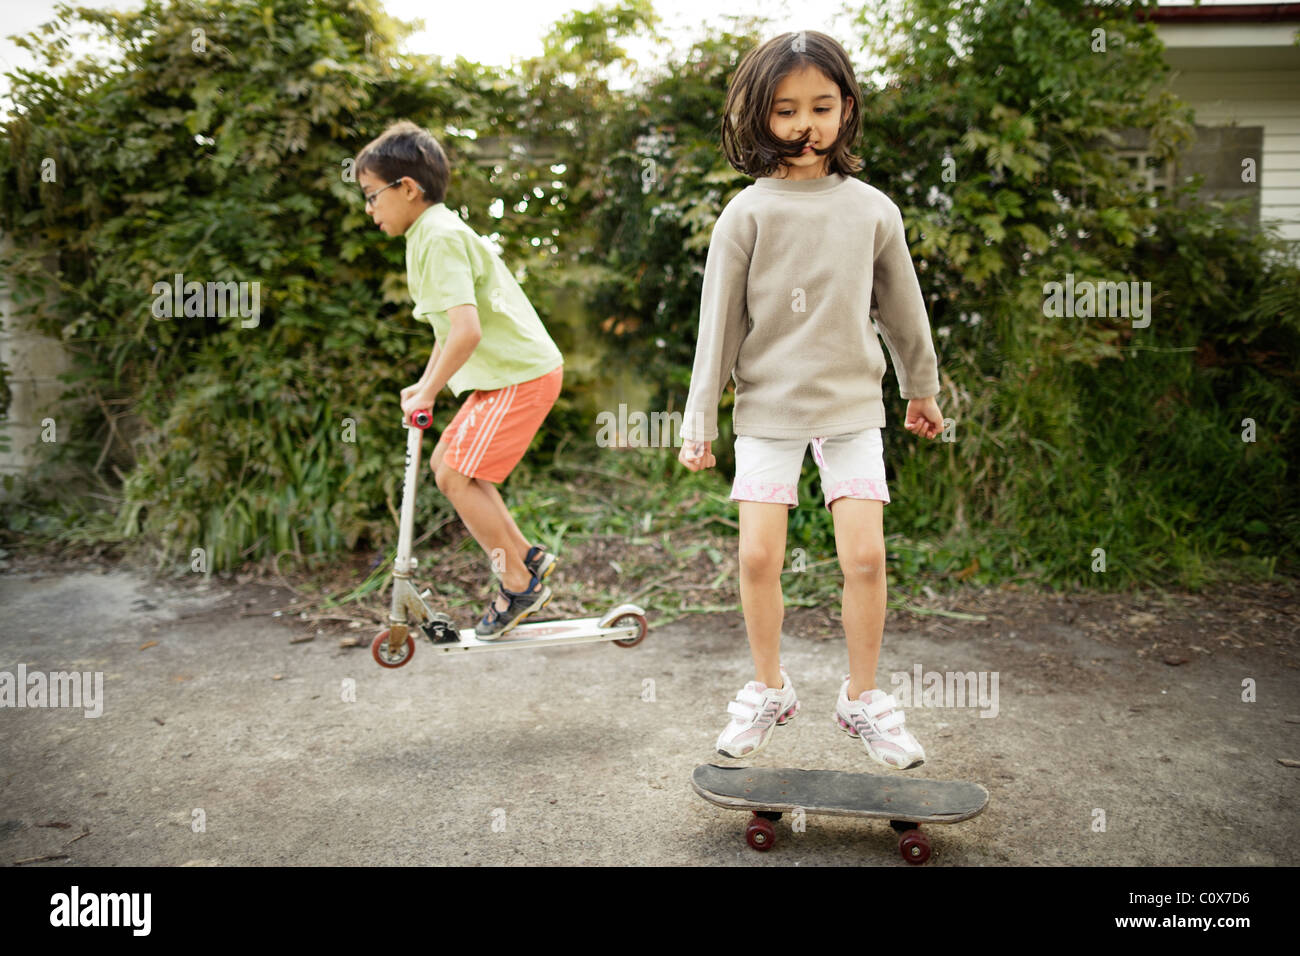 Girl jumps on skateboard as boy bunny-hops on scooter. Stock Photo